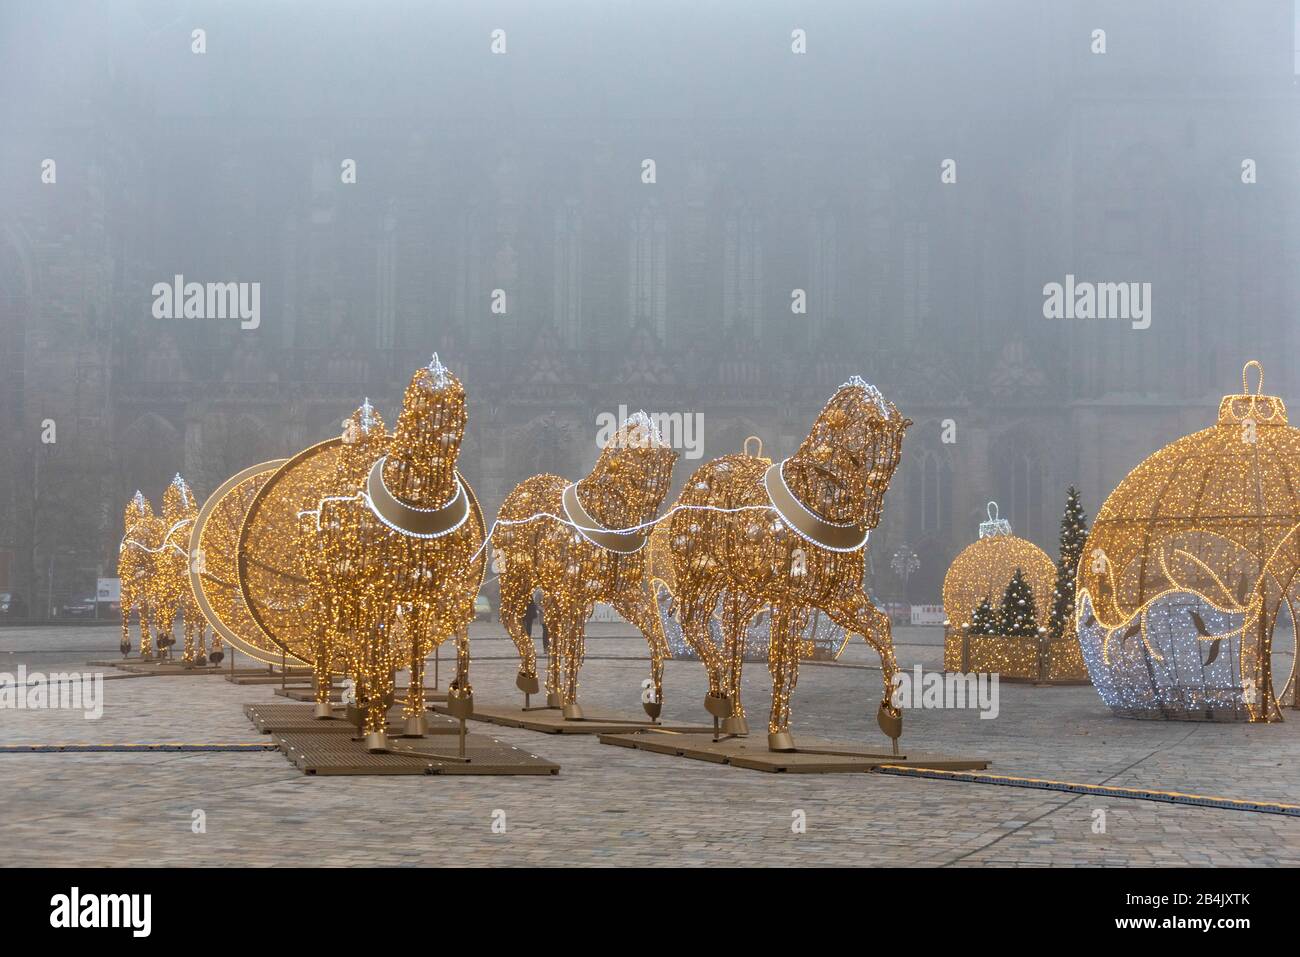 Germany, Saxony-Anhalt, Magdeburg, oversized Christmas balls and horses following the hemisphere attempt of the physicist Otto-von-Guericke stand on the cathedral square in Magdeburg. They belong to the world of lights in the city. In Advent, dozens of figures shine in Magdeburg, consisting of one million LED lights. They were made by the Polish company Multidekor. Stock Photo